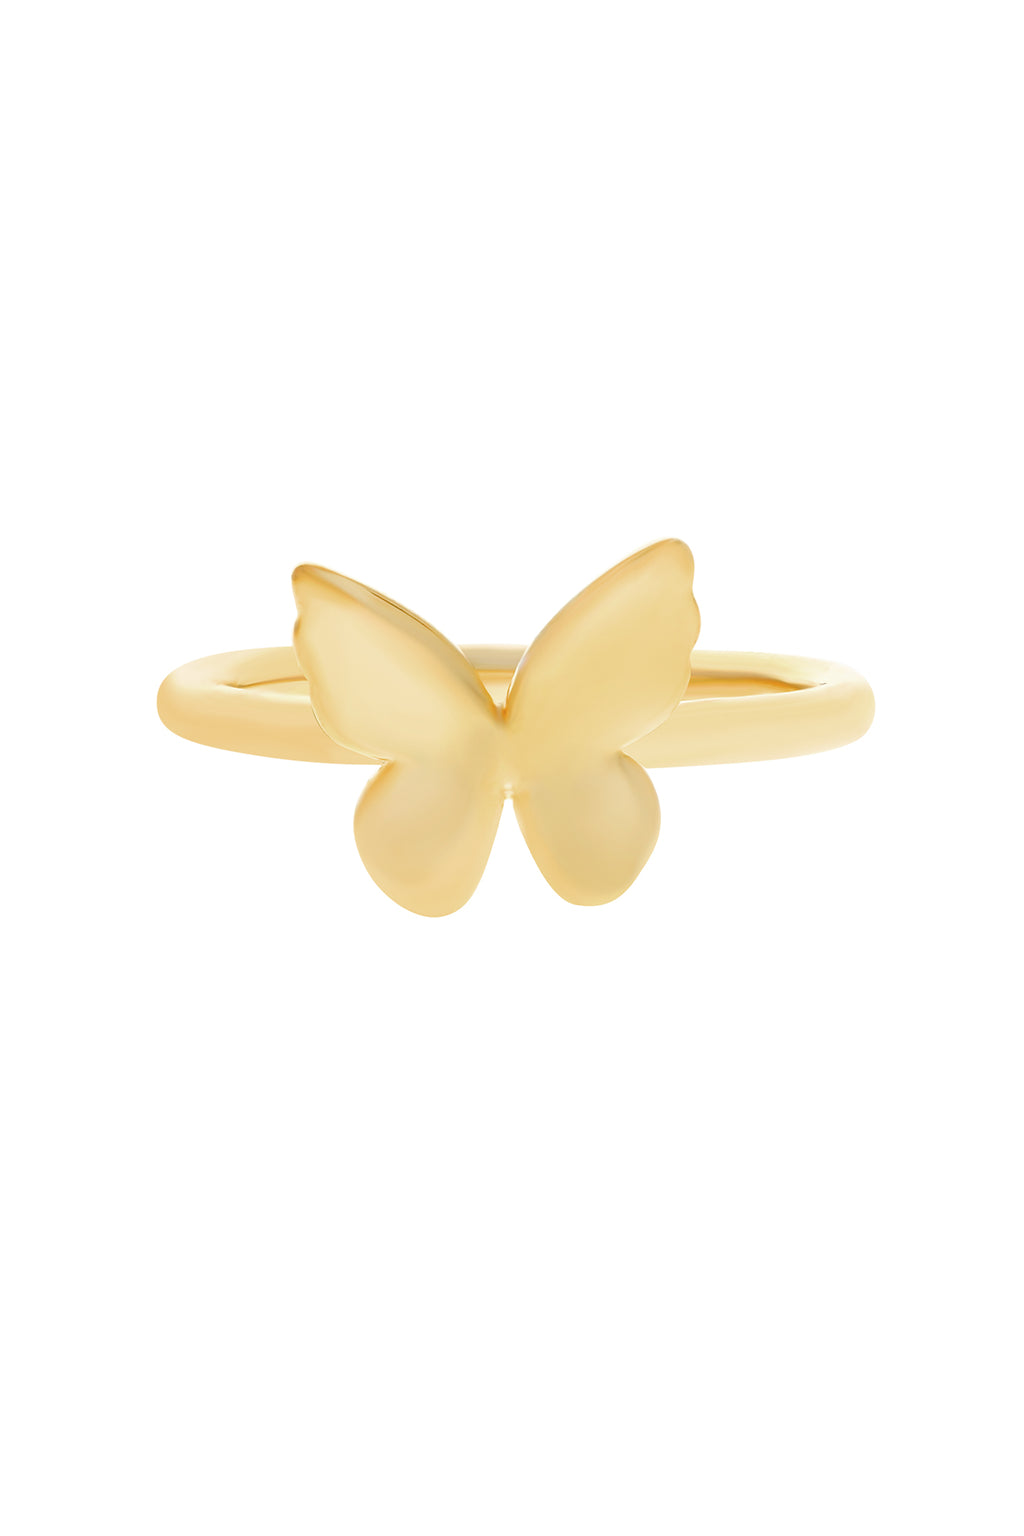 Alida Butterfly Vermeil Ring image-Chvker Jewelry